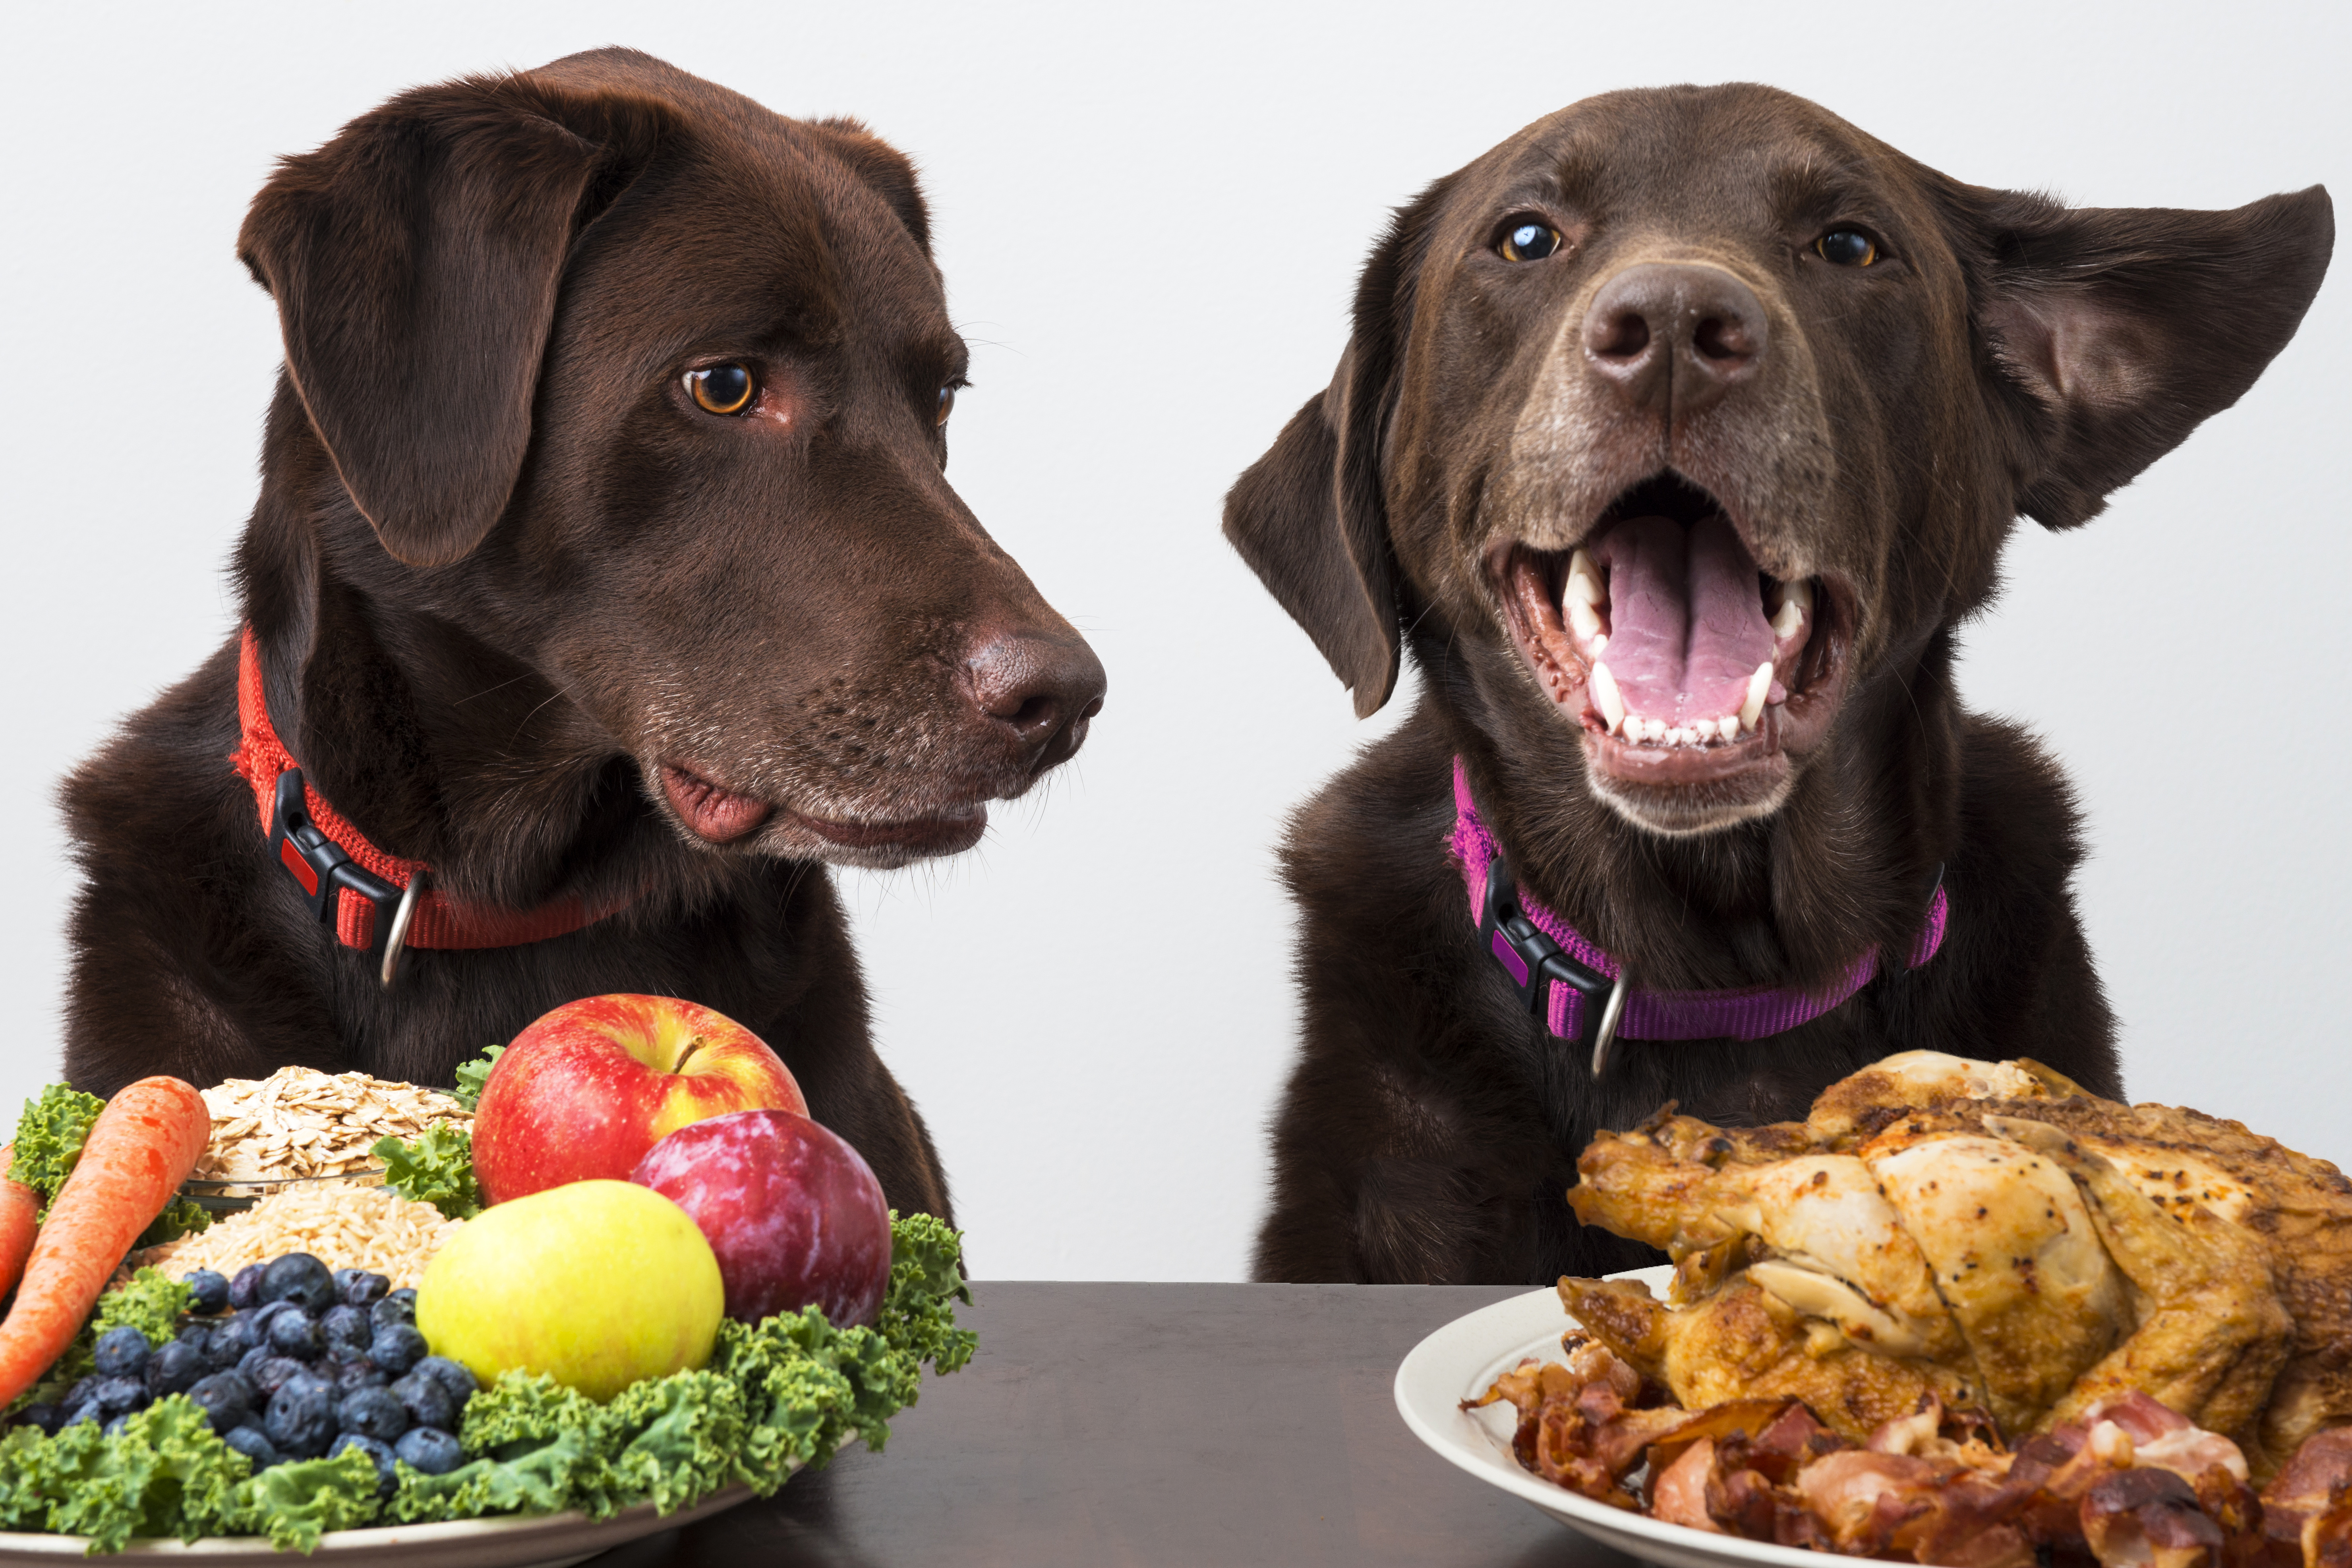 Looking to Buy Evolve Dog Food Near You. Check Out 10 Must-Know Facts Before Purchasing